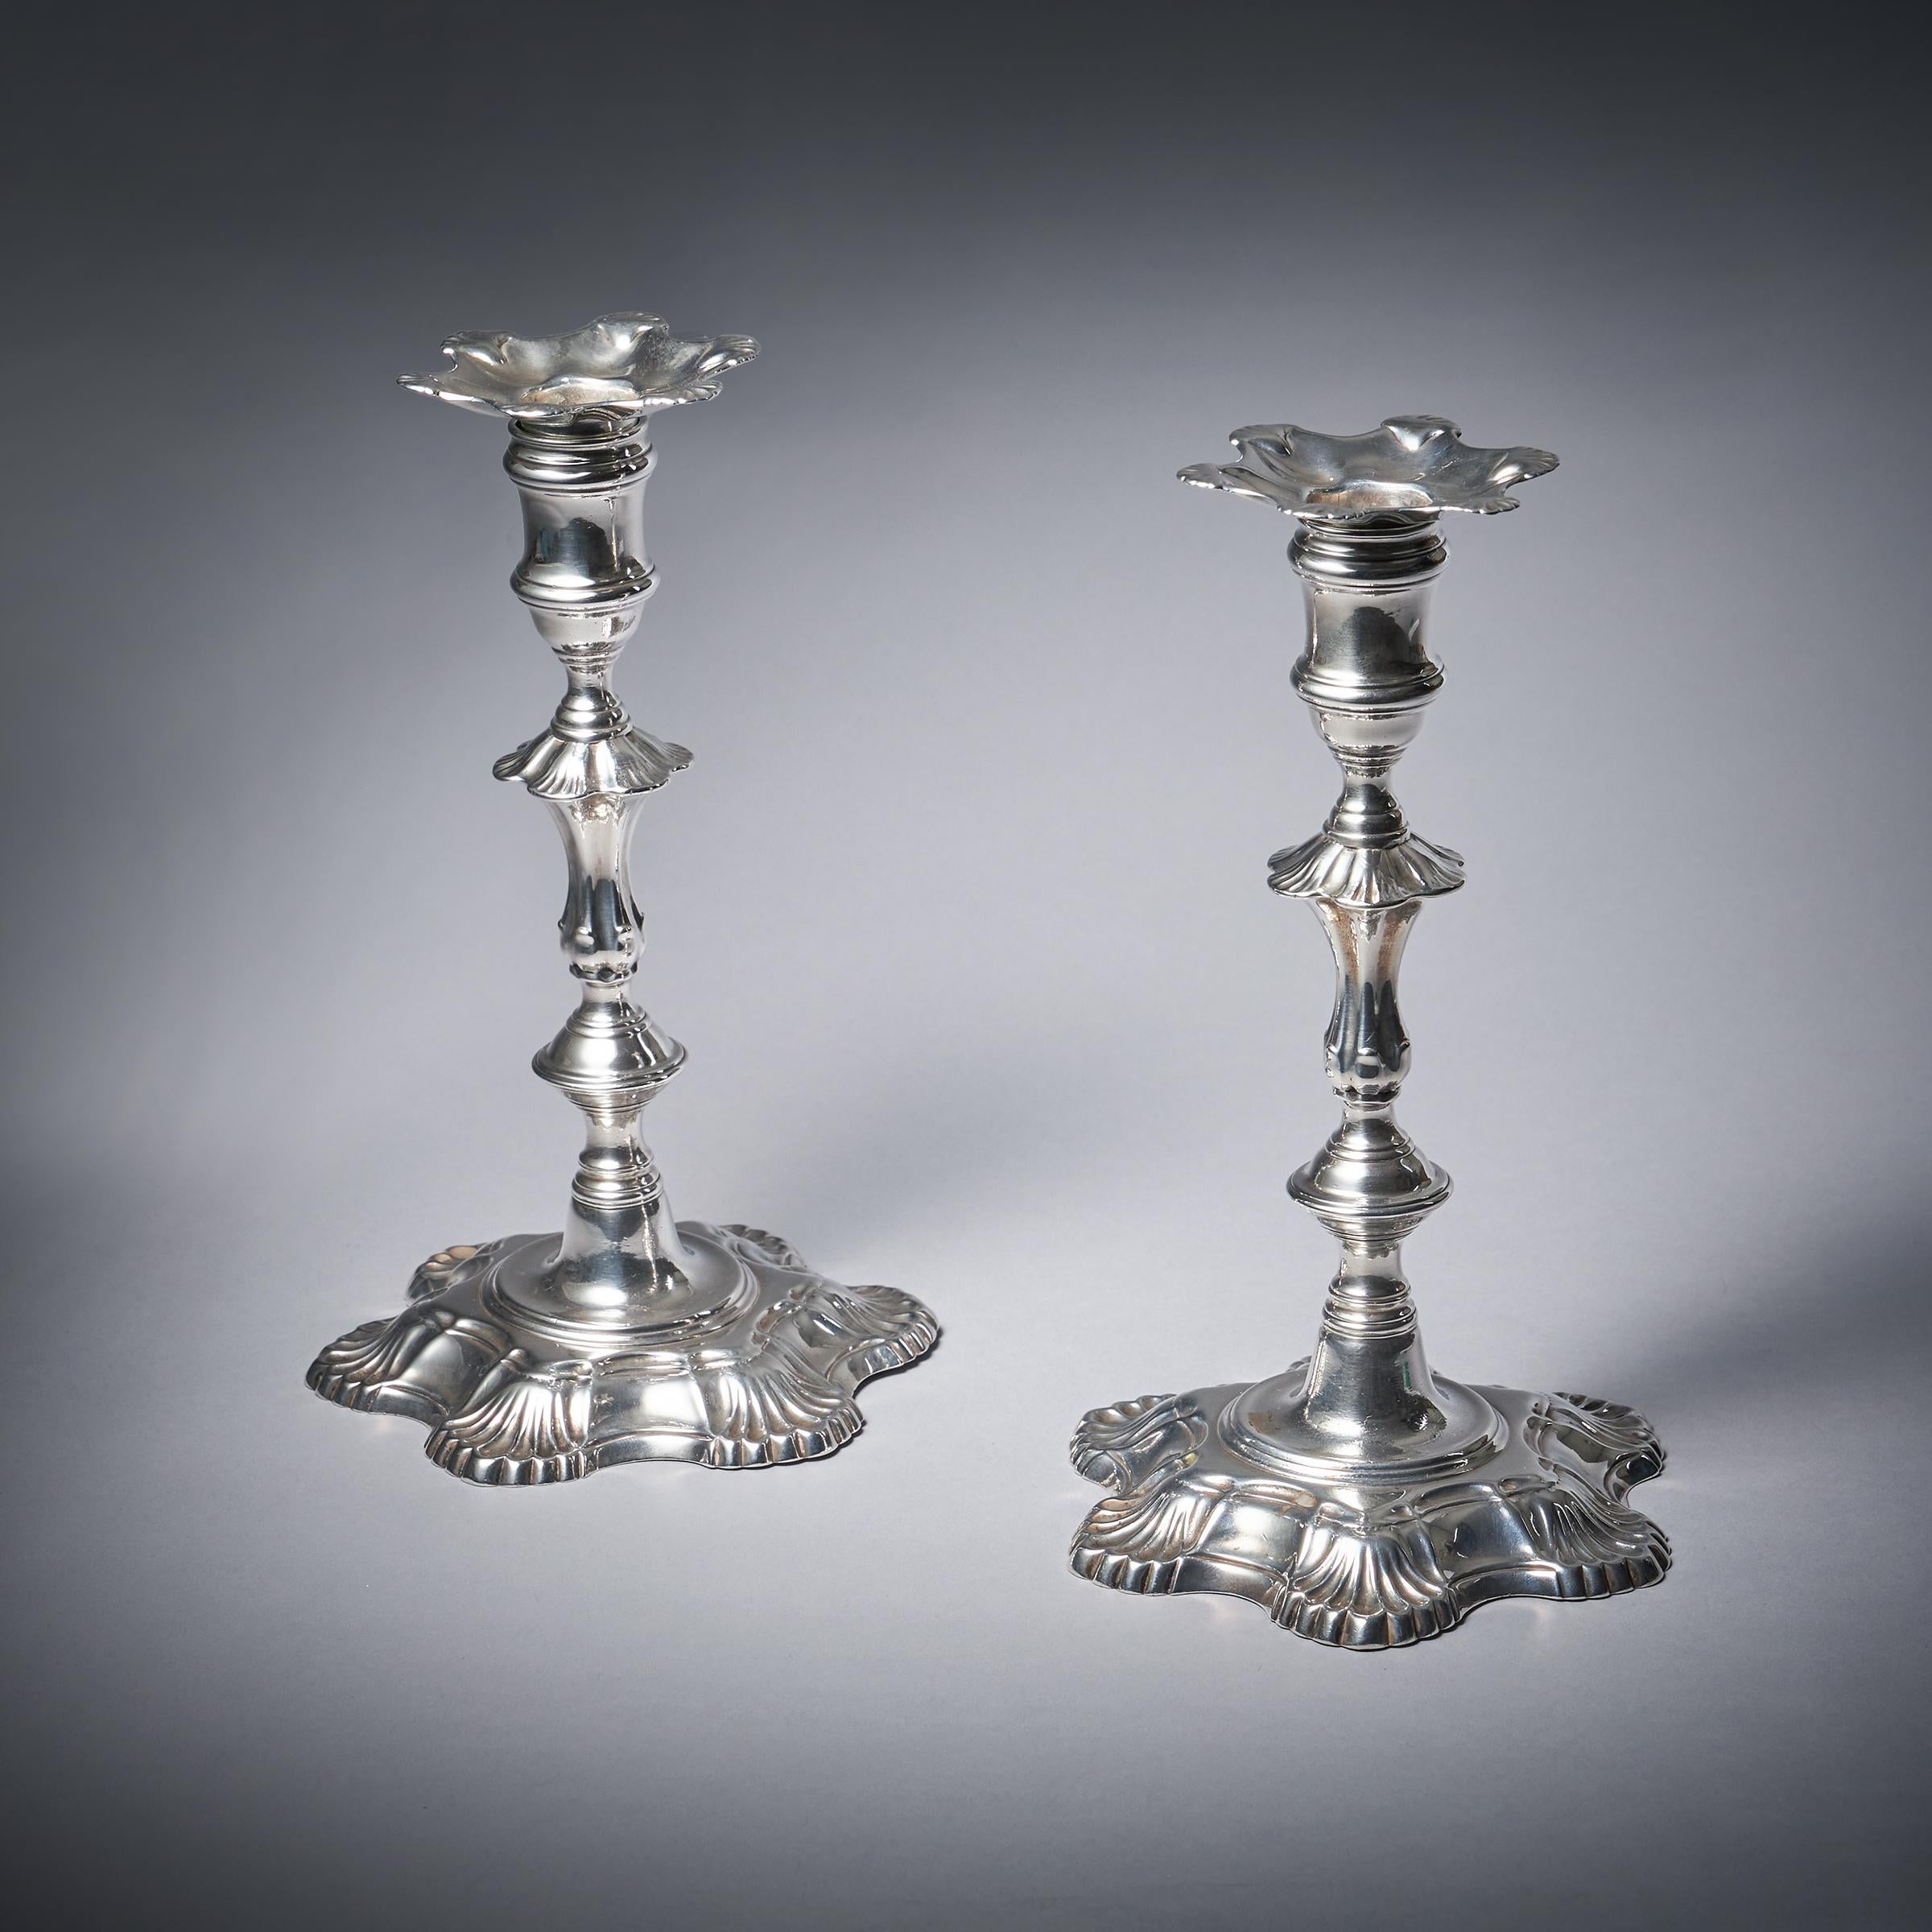 A Pair of 18th Century George II Silver Candlesticks by John Cafe, London 1751 2